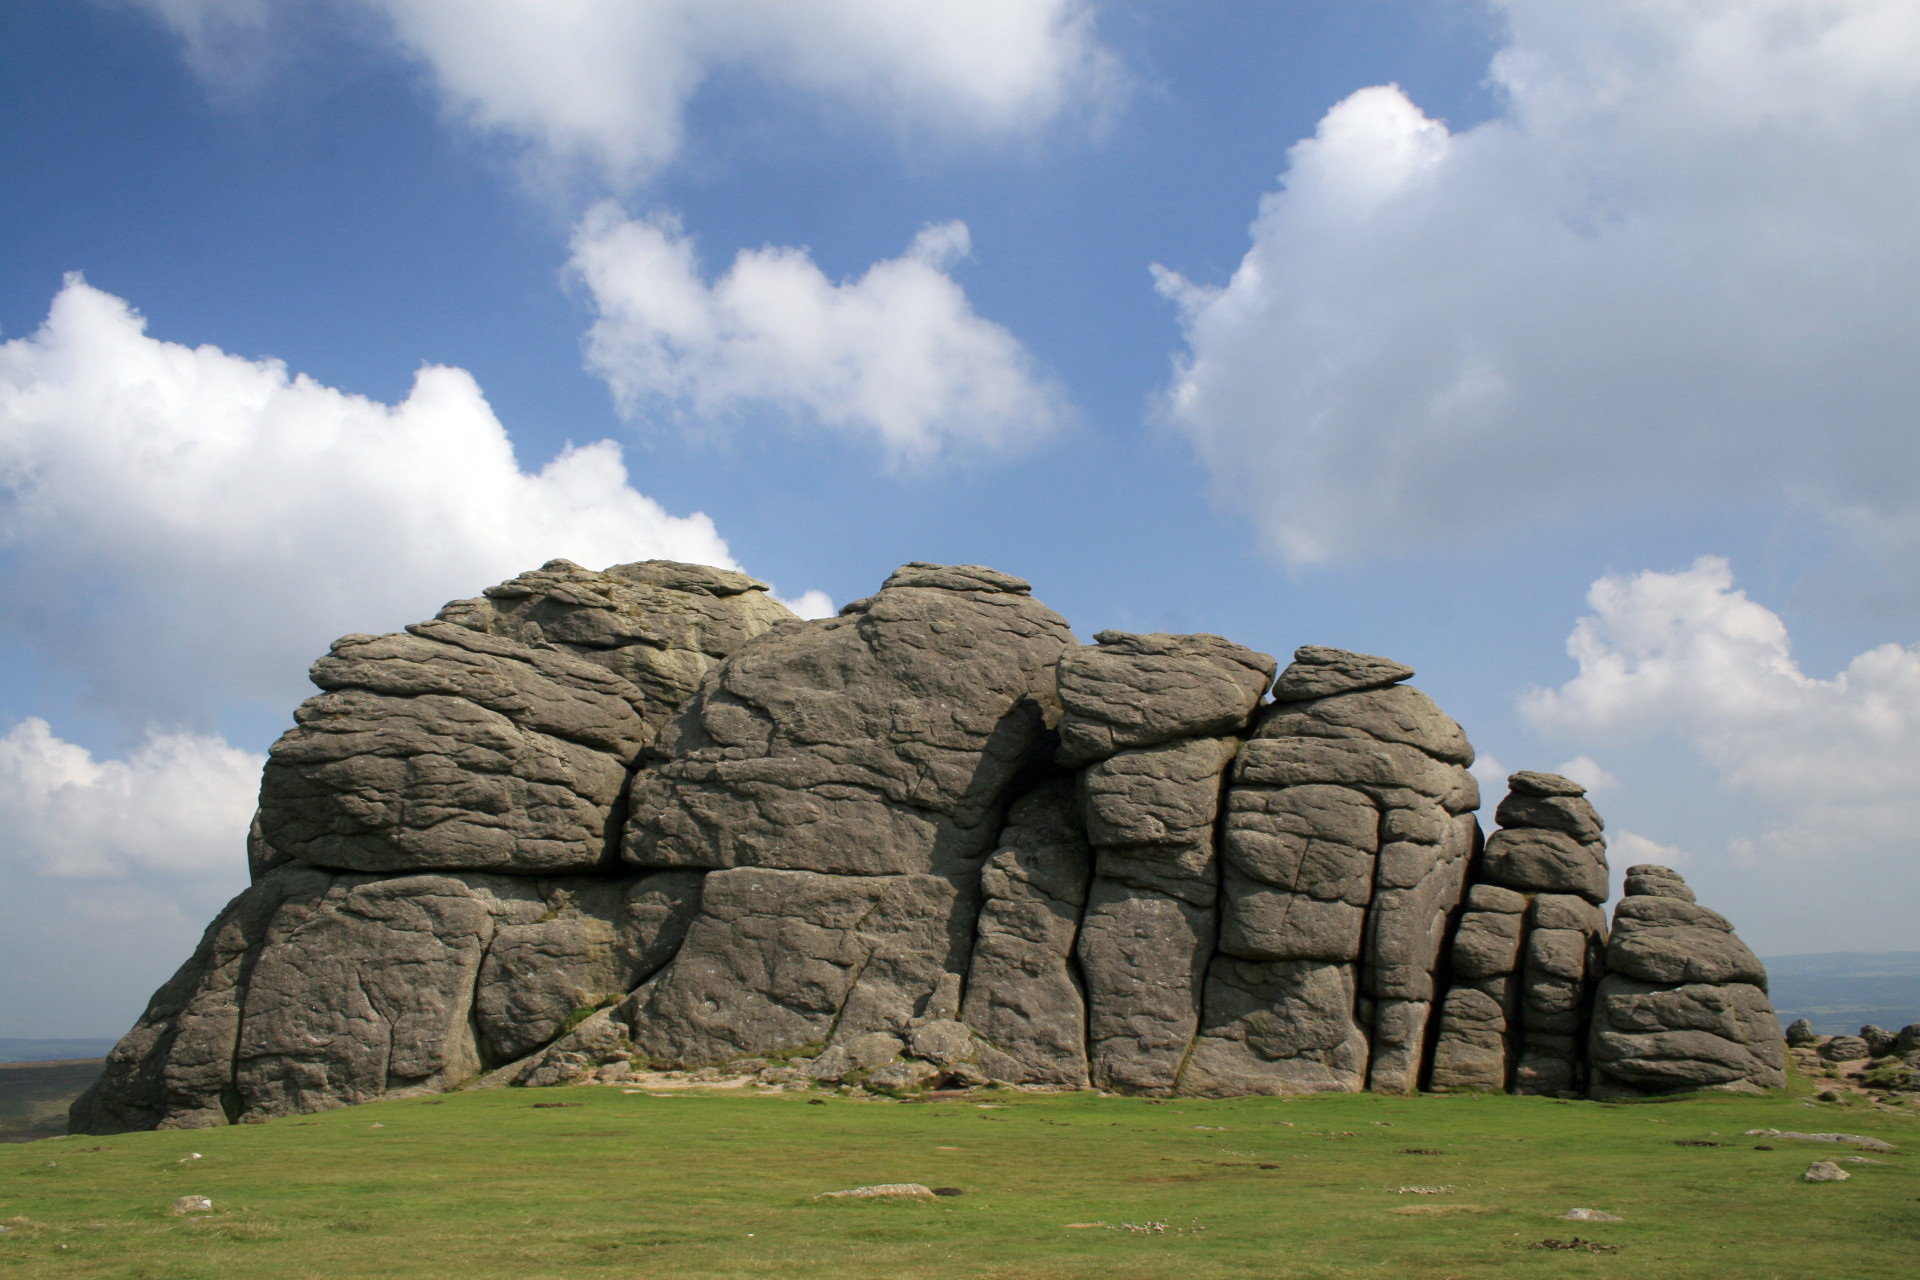 Key stops include the ancient Hound Tor and Dartmeet, a centre of important archaeological landscapes.<p><a href="https://www.msn.com/en-us/community/channel/vid-7xx8mnucu55yw63we9va2gwr7uihbxwc68fxqp25x6tg4ftibpra?cvid=94631541bc0f4f89bfd59158d696ad7e">Follow us and access great exclusive content every day</a></p>